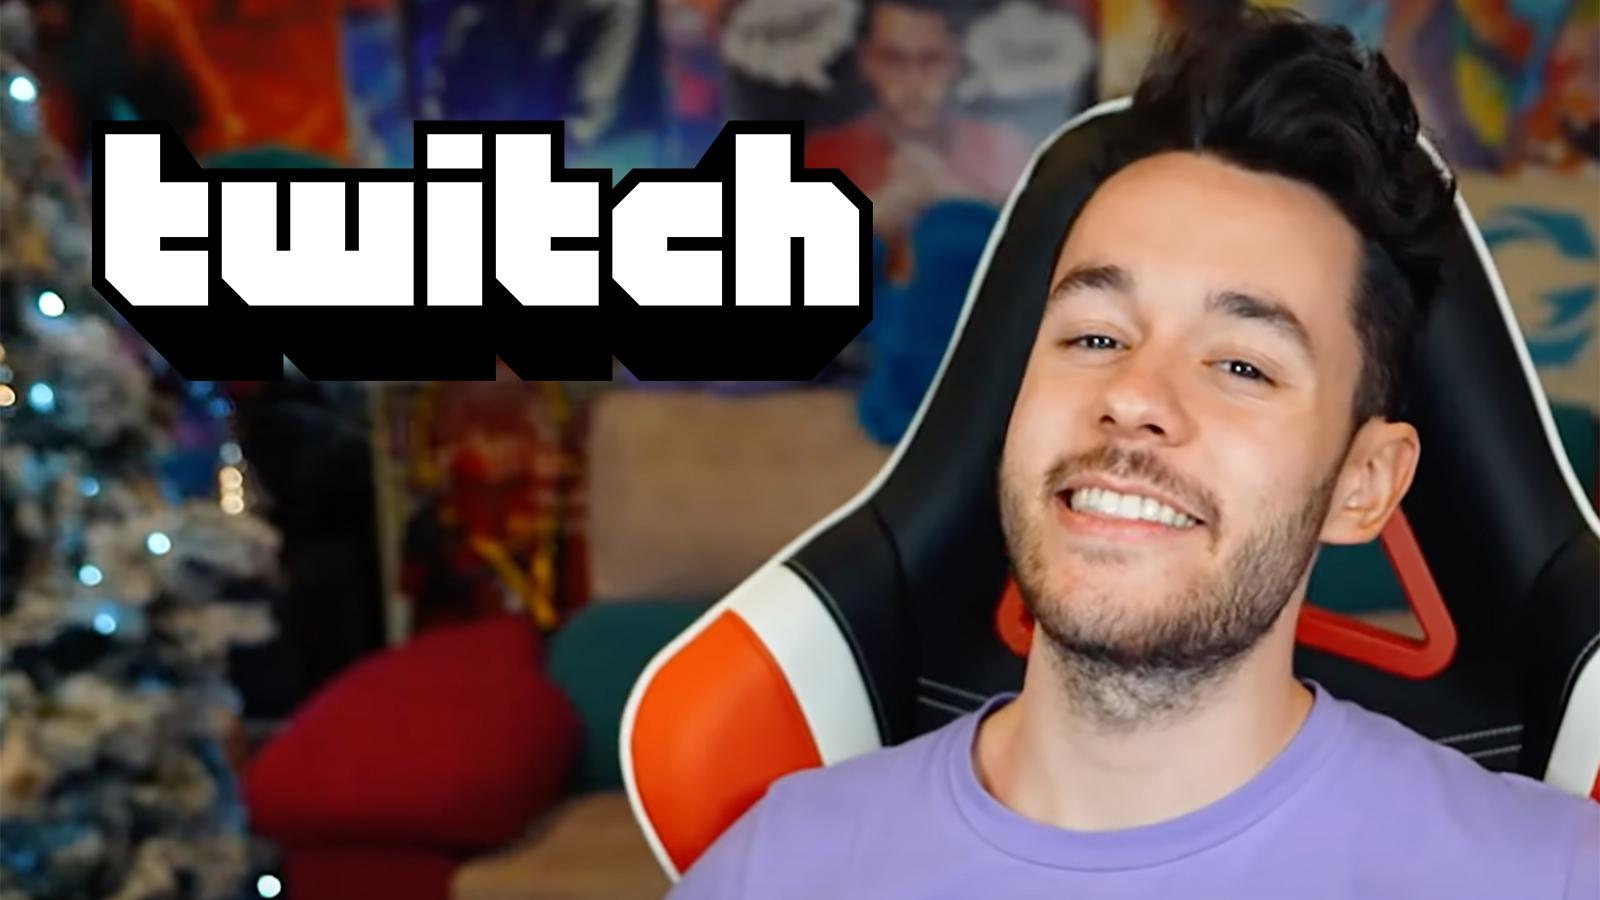 The Verge on X: Spanish Fortnite streamer TheGrefg has broken the  individual record for highest concurrents on Twitch    / X